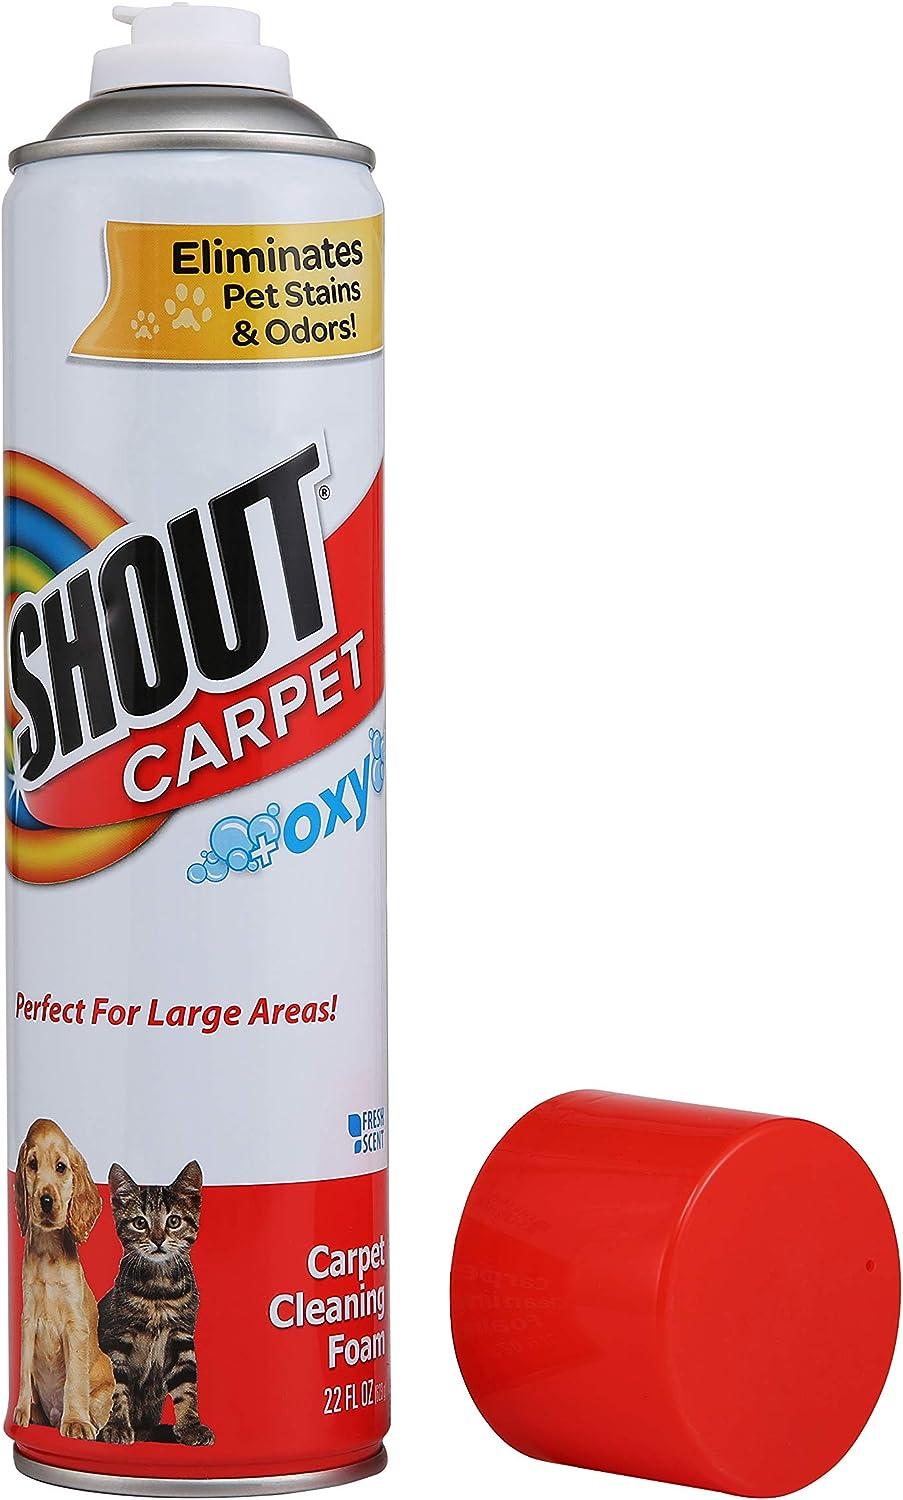 Shout Carpet Cleaning Spray with Oxy for Pet Stains and Odors, 32 fl. oz.